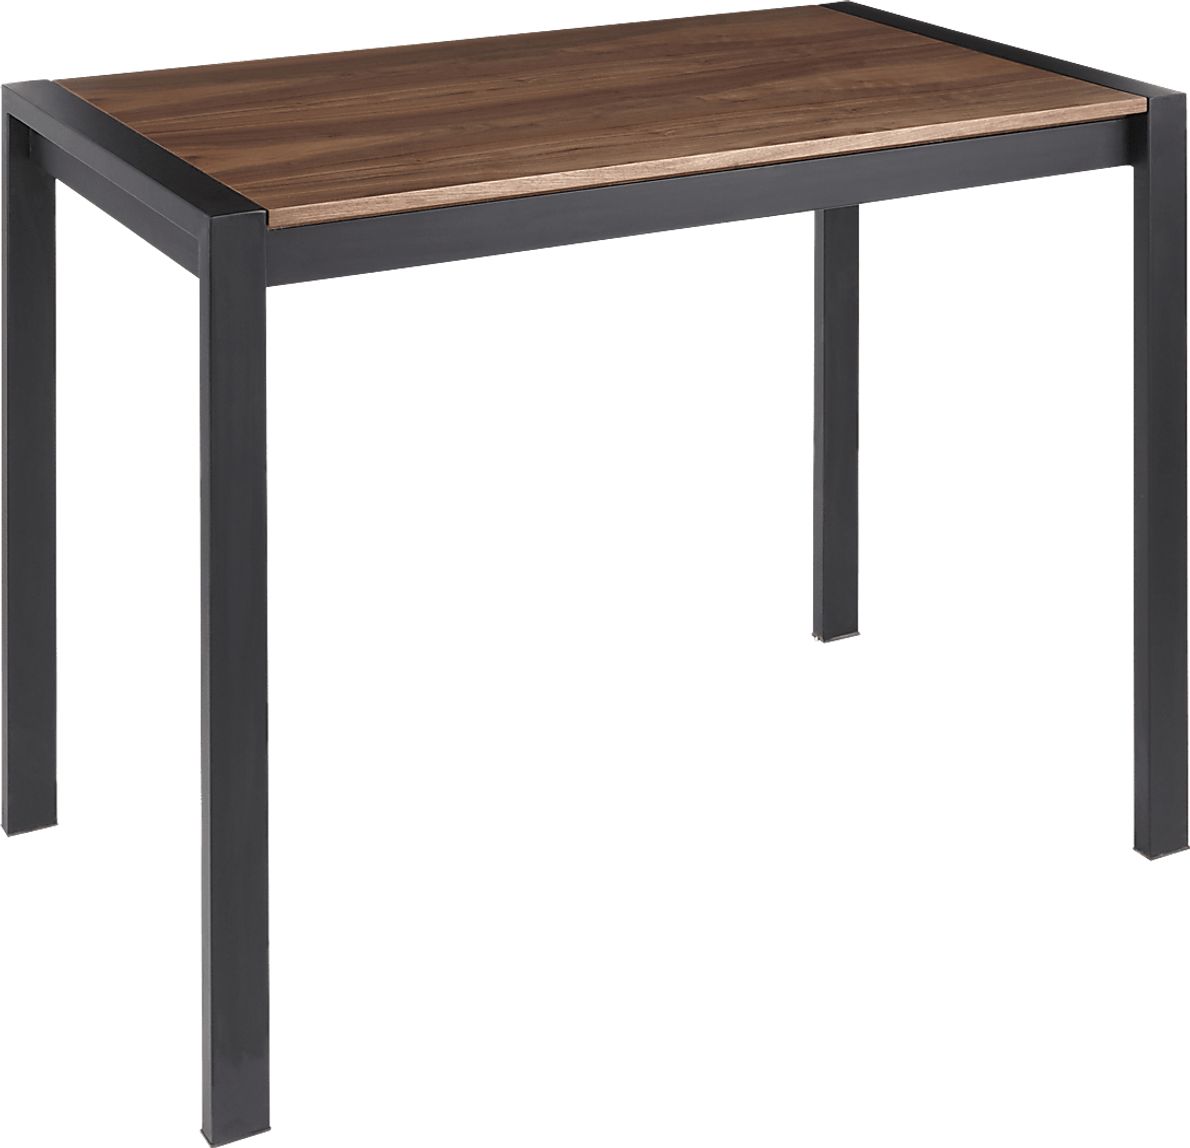 Sora Walnut Counter Height Dining Table